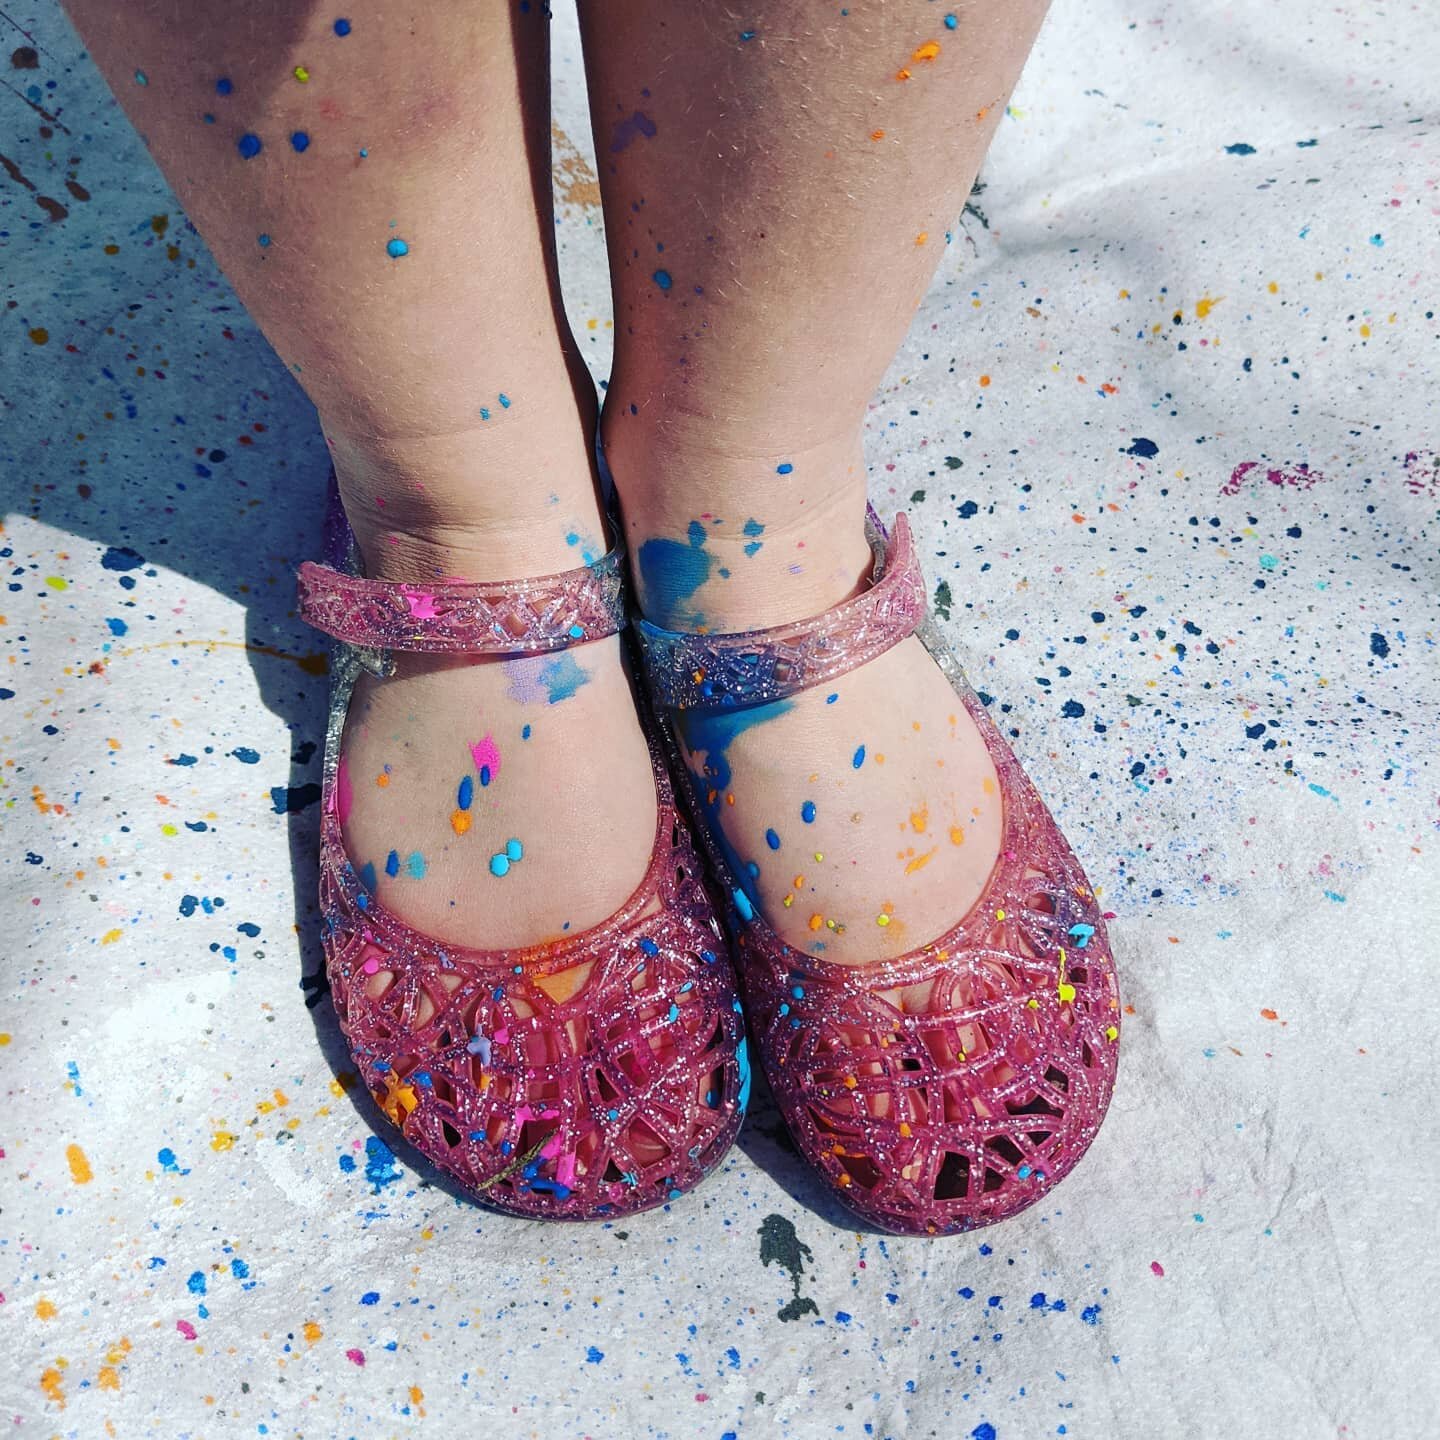 Did you say Jackson Pollock Splatter Camp ??! 🎨🎨🎨. Oh yes .. we did!! 
And we went home pretty splattery !! We have a couple of spots open for Friday March 12th. ❤️
.
#cutestlittlefeet
#wearmessyclothes

.
#ginamariesart #jacksonpollock #splattera